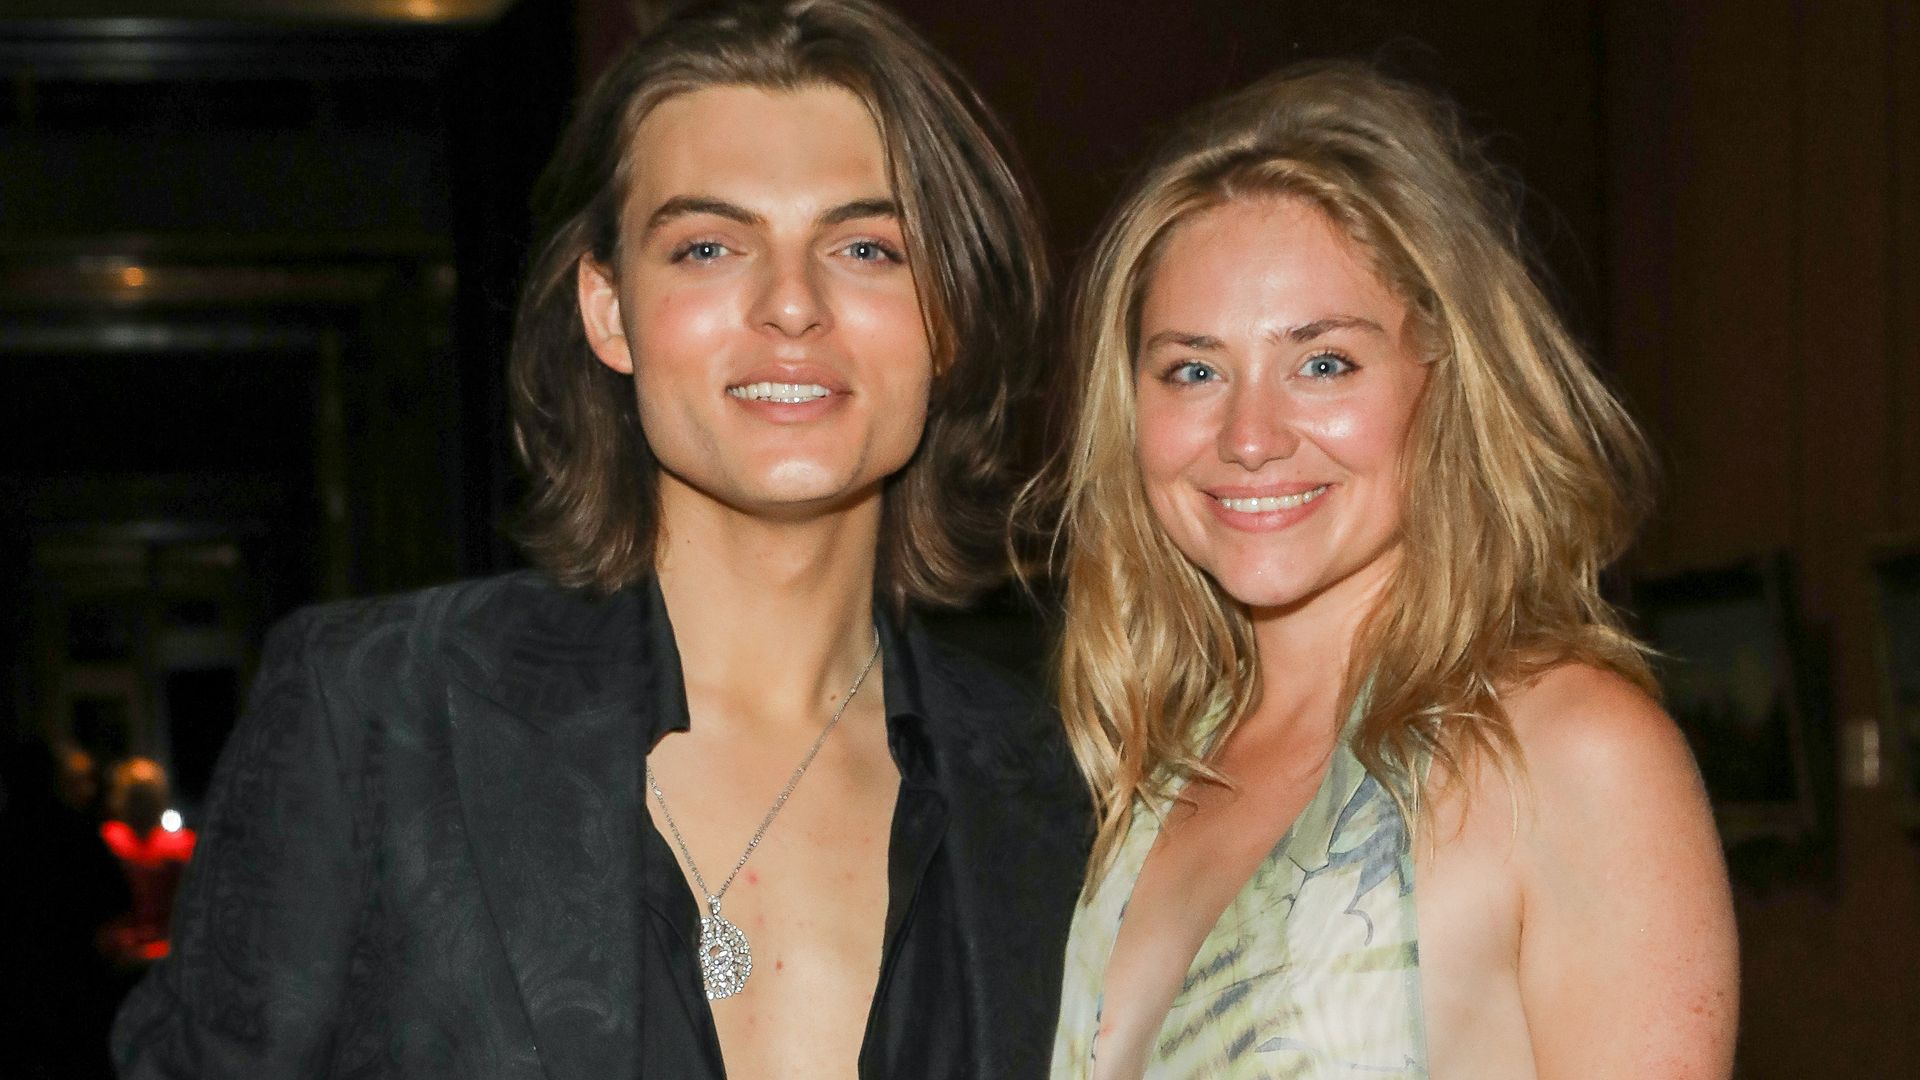 Elizabeth Hurley's lookalike son steps out with friend who bears ...